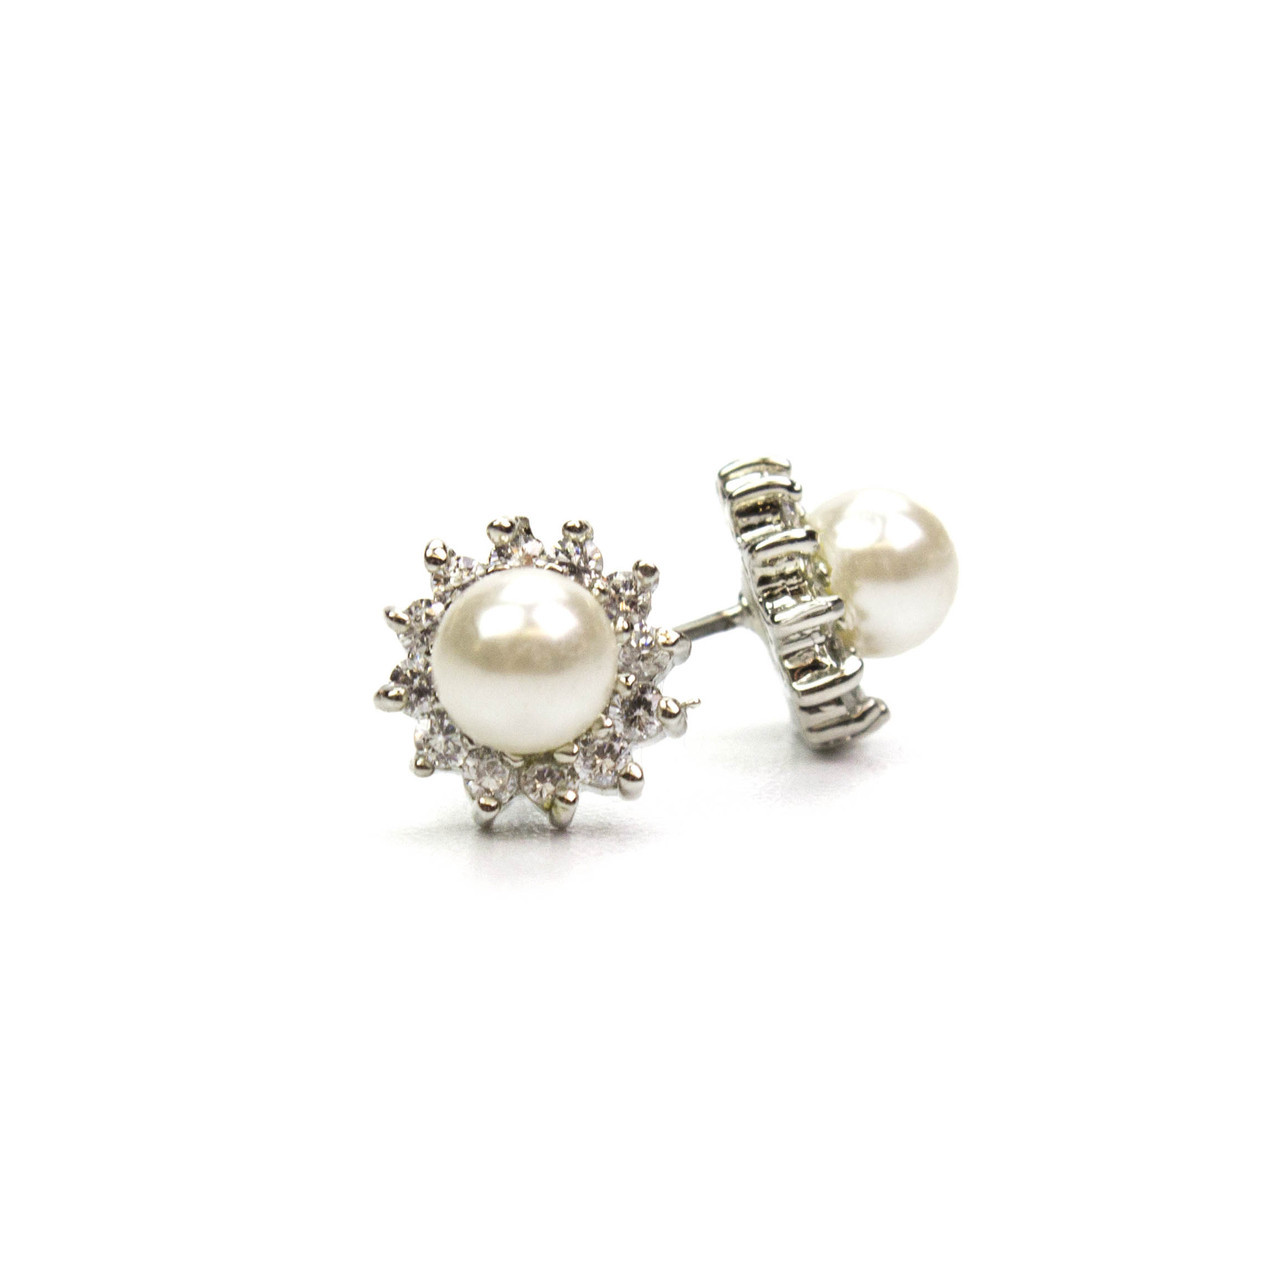 Bright Sunrise Pearl and Crystal Post Earrings